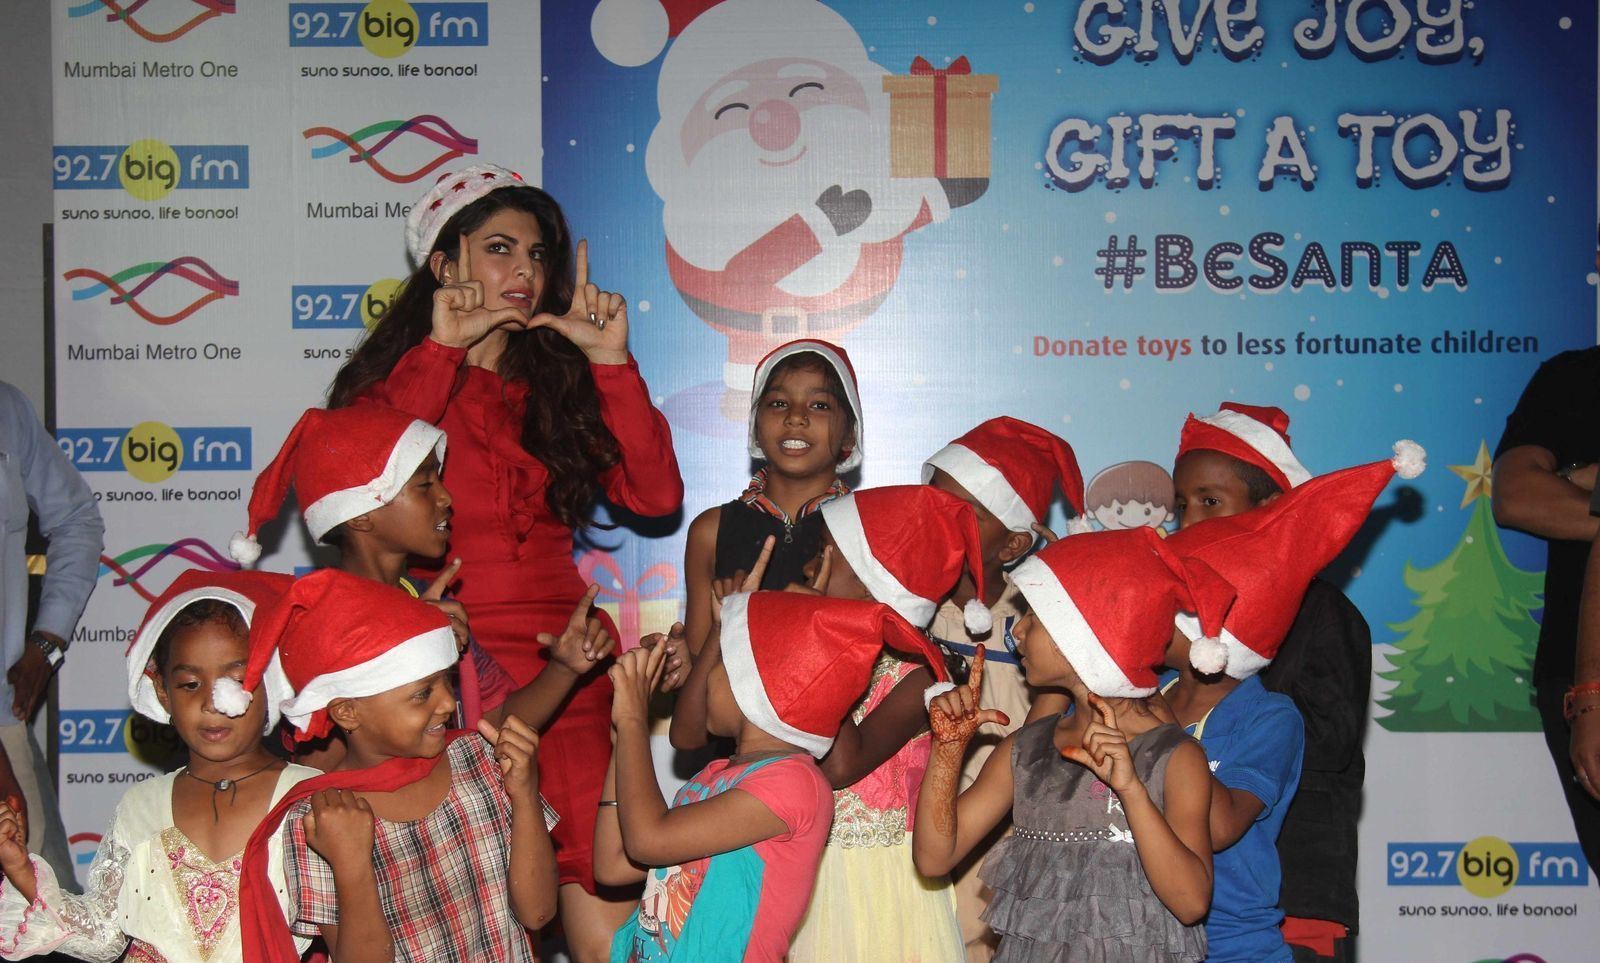 Jacqueline Fernandez Looks Super Sexy In Red Dress As She Celebrates Christmas With The Angel Xpress Foundation in Mumbai